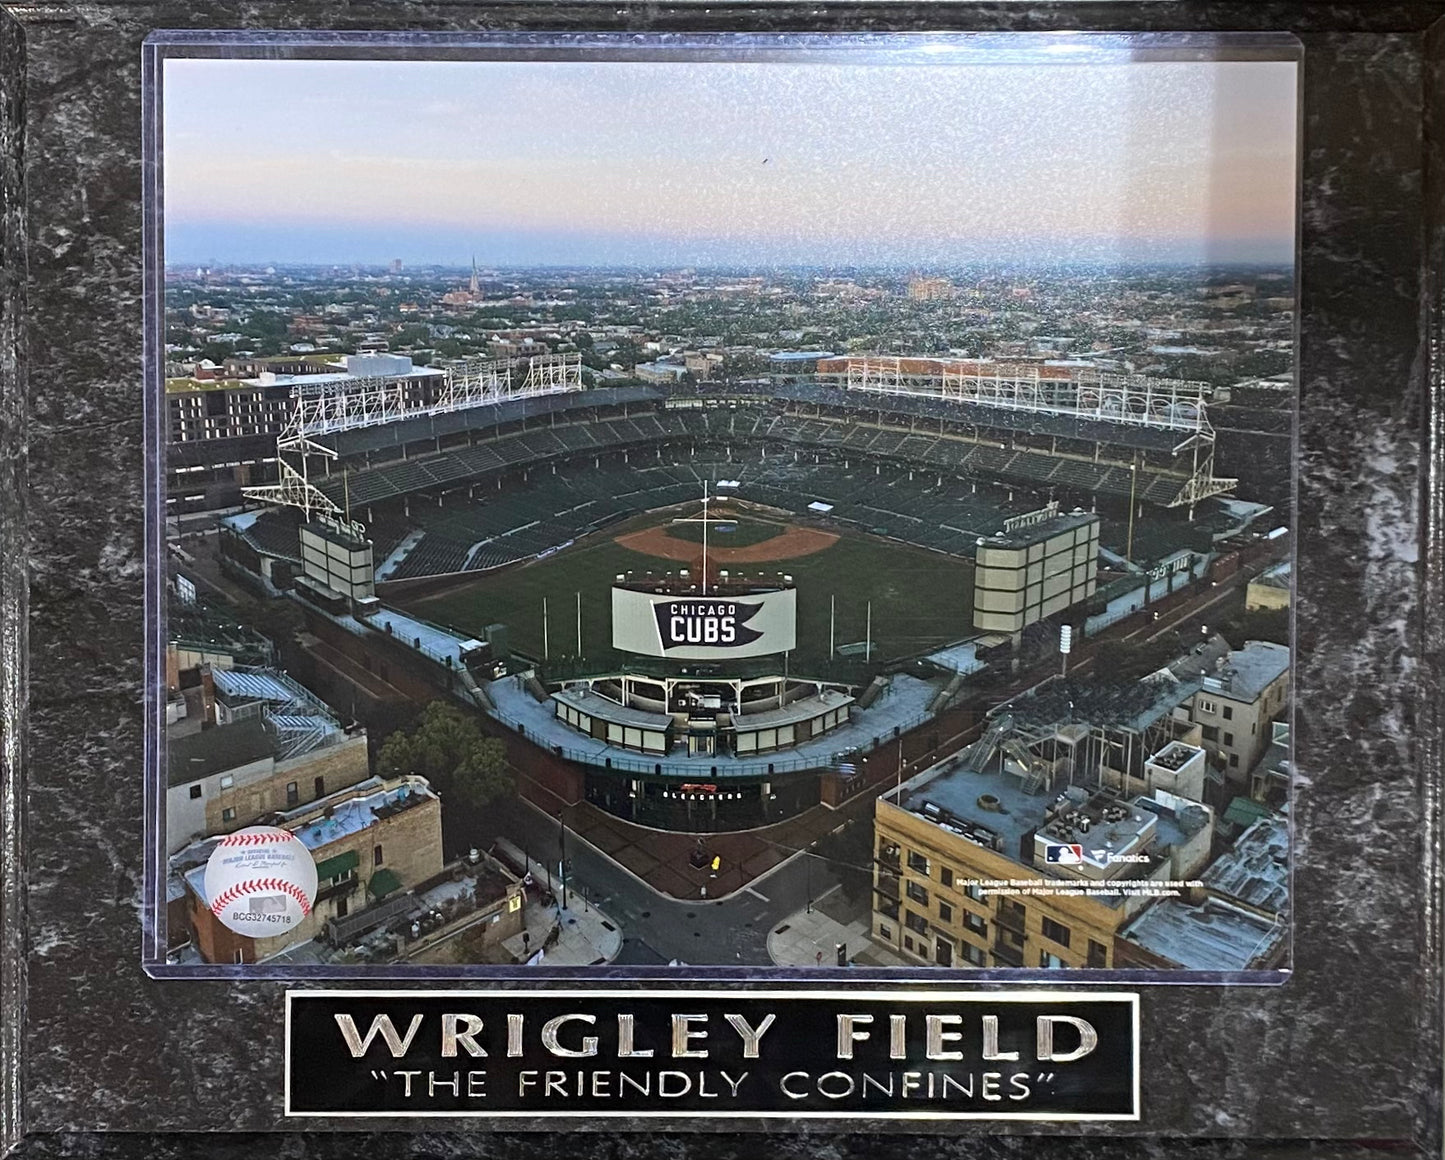 Chicago Cubs Wrigley Field "The Friendly Confines" Photo Plaque